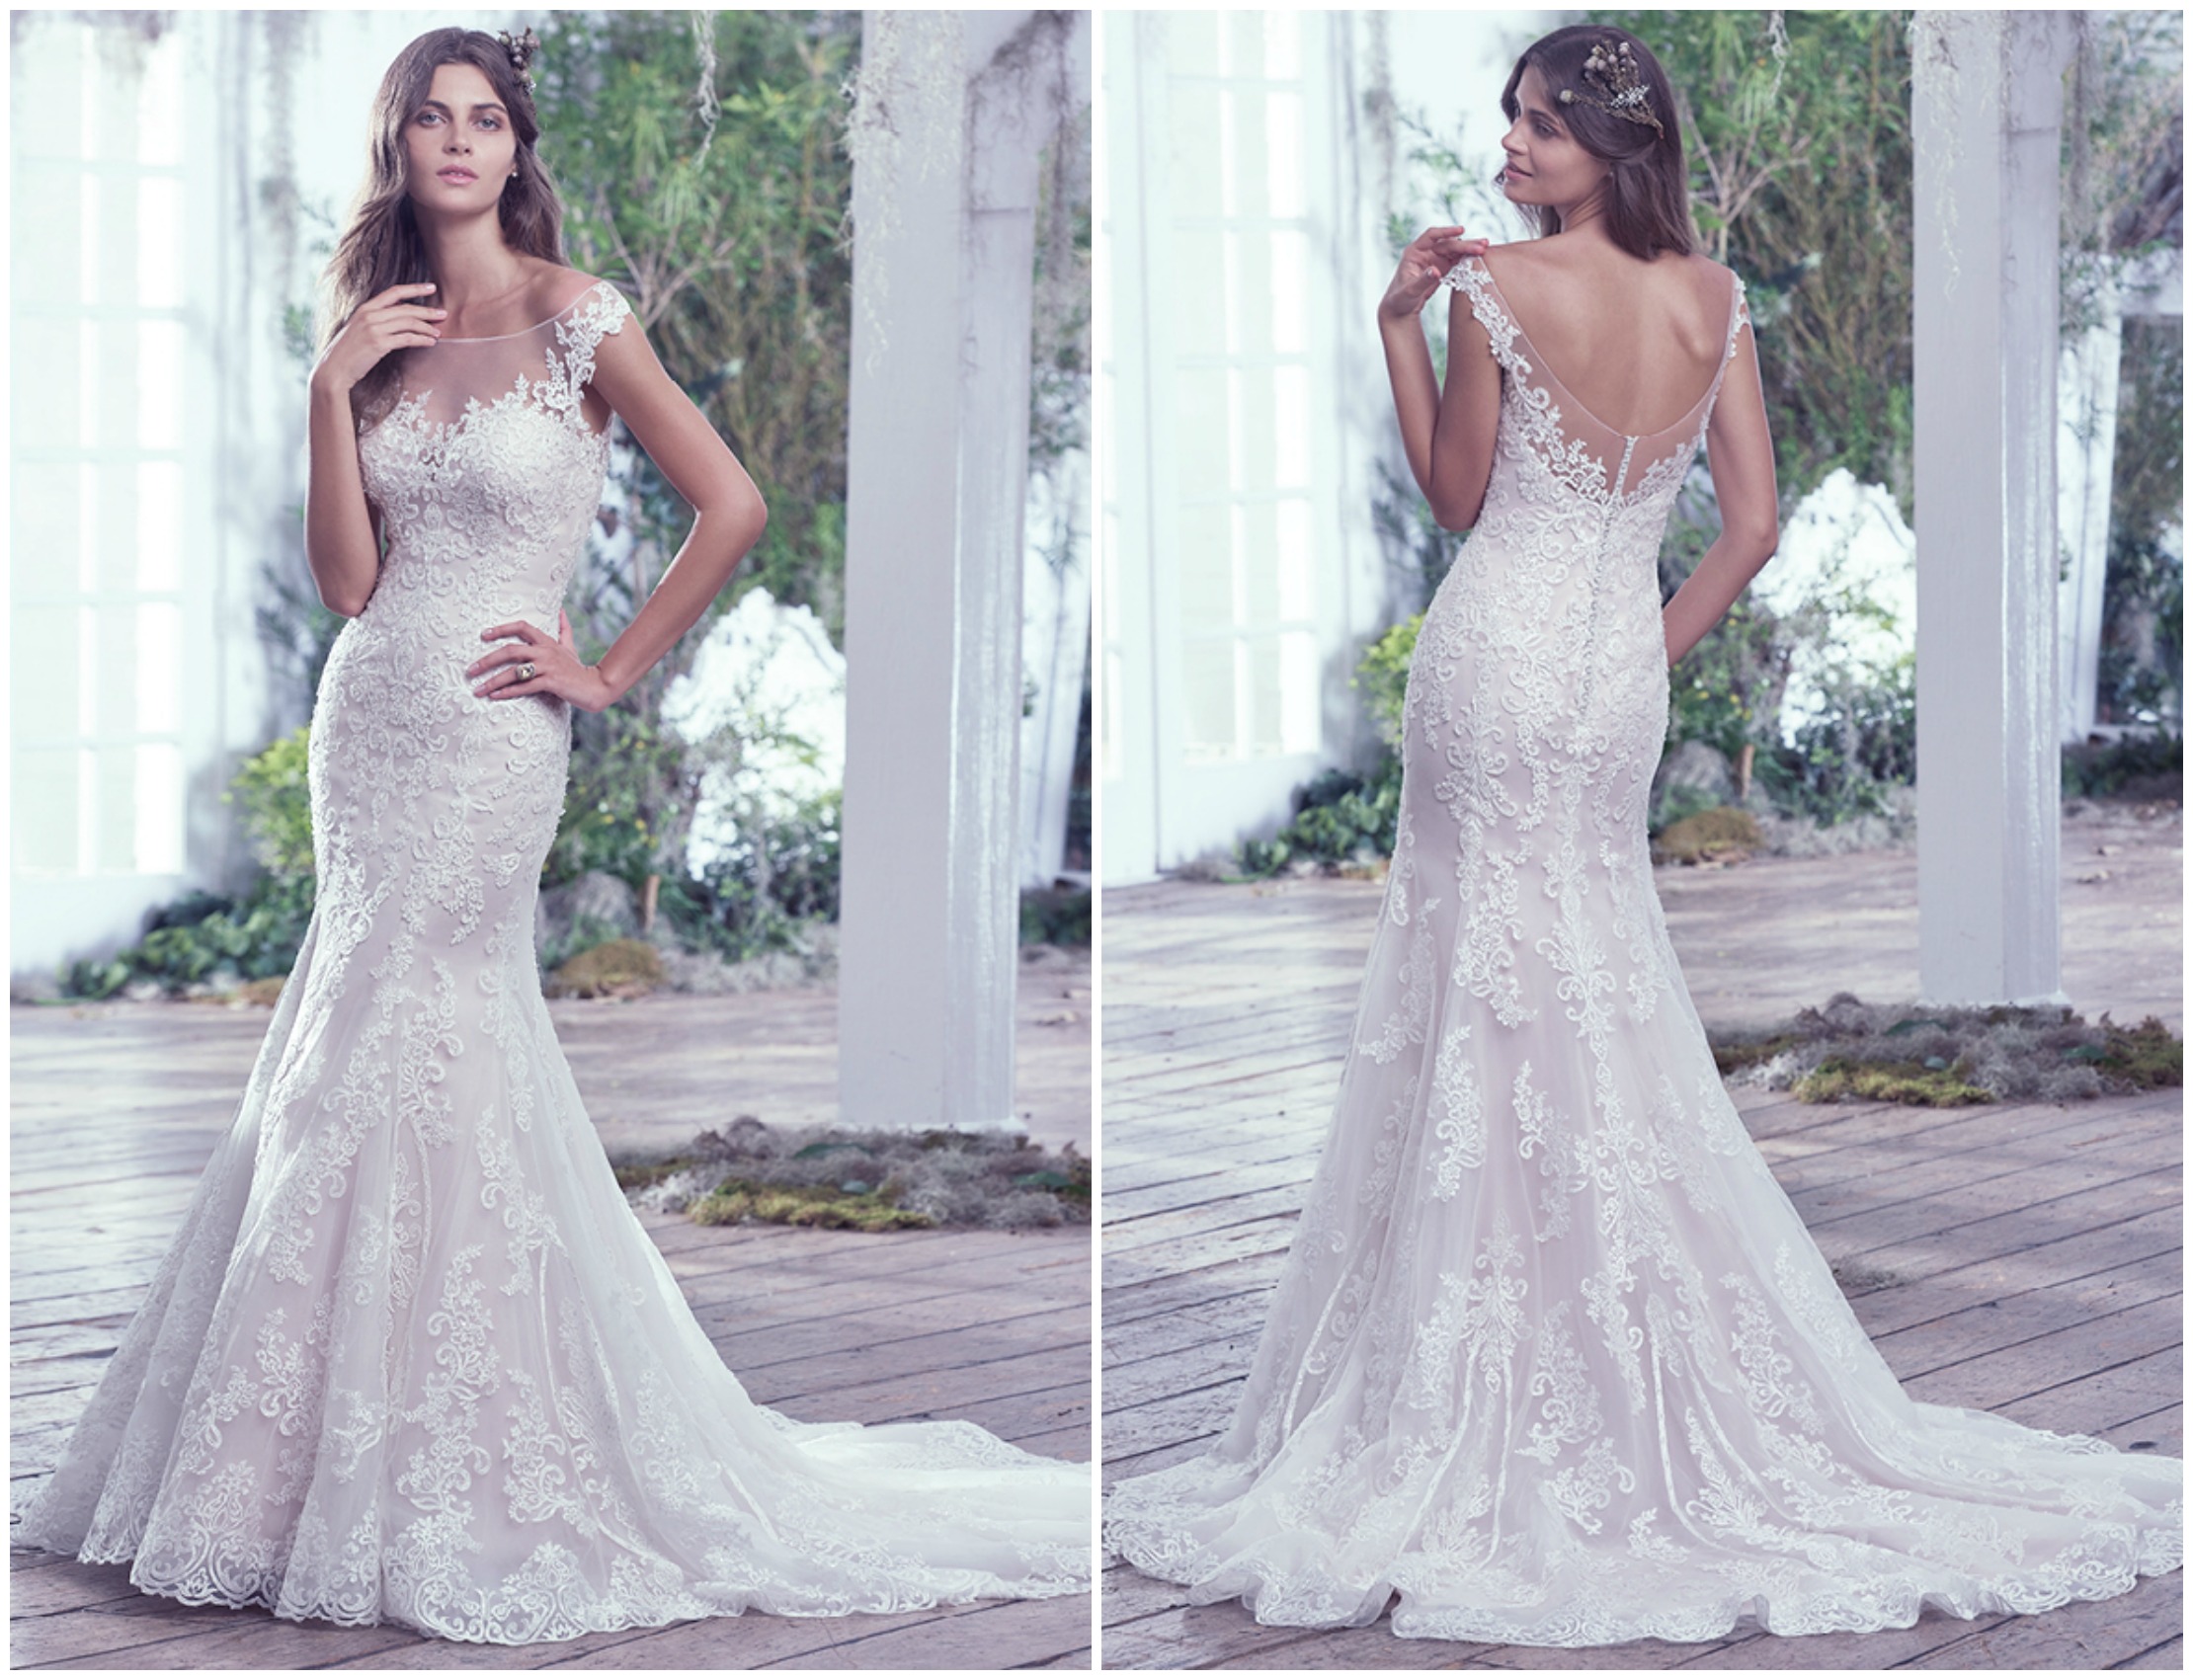 This embellished lace fit and flare wedding dress balances romantic details with ethereal whimsy. Illusion off the shoulder lace sleeves, an illusion sweetheart neckline and scalloped hem complete this elegant wedding day look. Finished with crystal buttons over zipper closure. 

<a href="https://www.maggiesottero.com/maggie-sottero/carson/9690" target="_blank">Maggie Sottero</a>